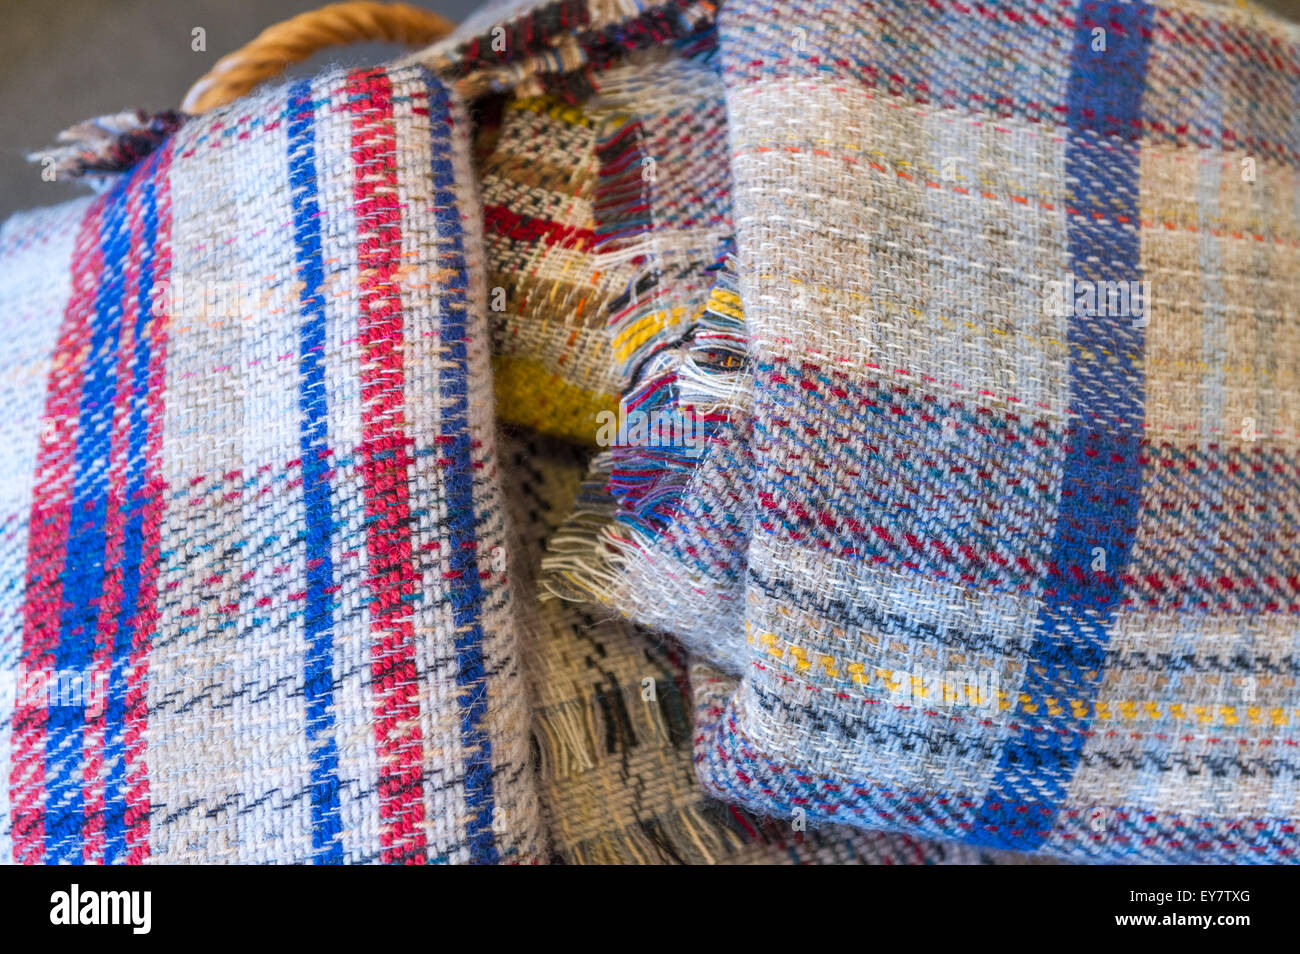 Knitted blankets or sheets in coloured patterns. Stock Photo